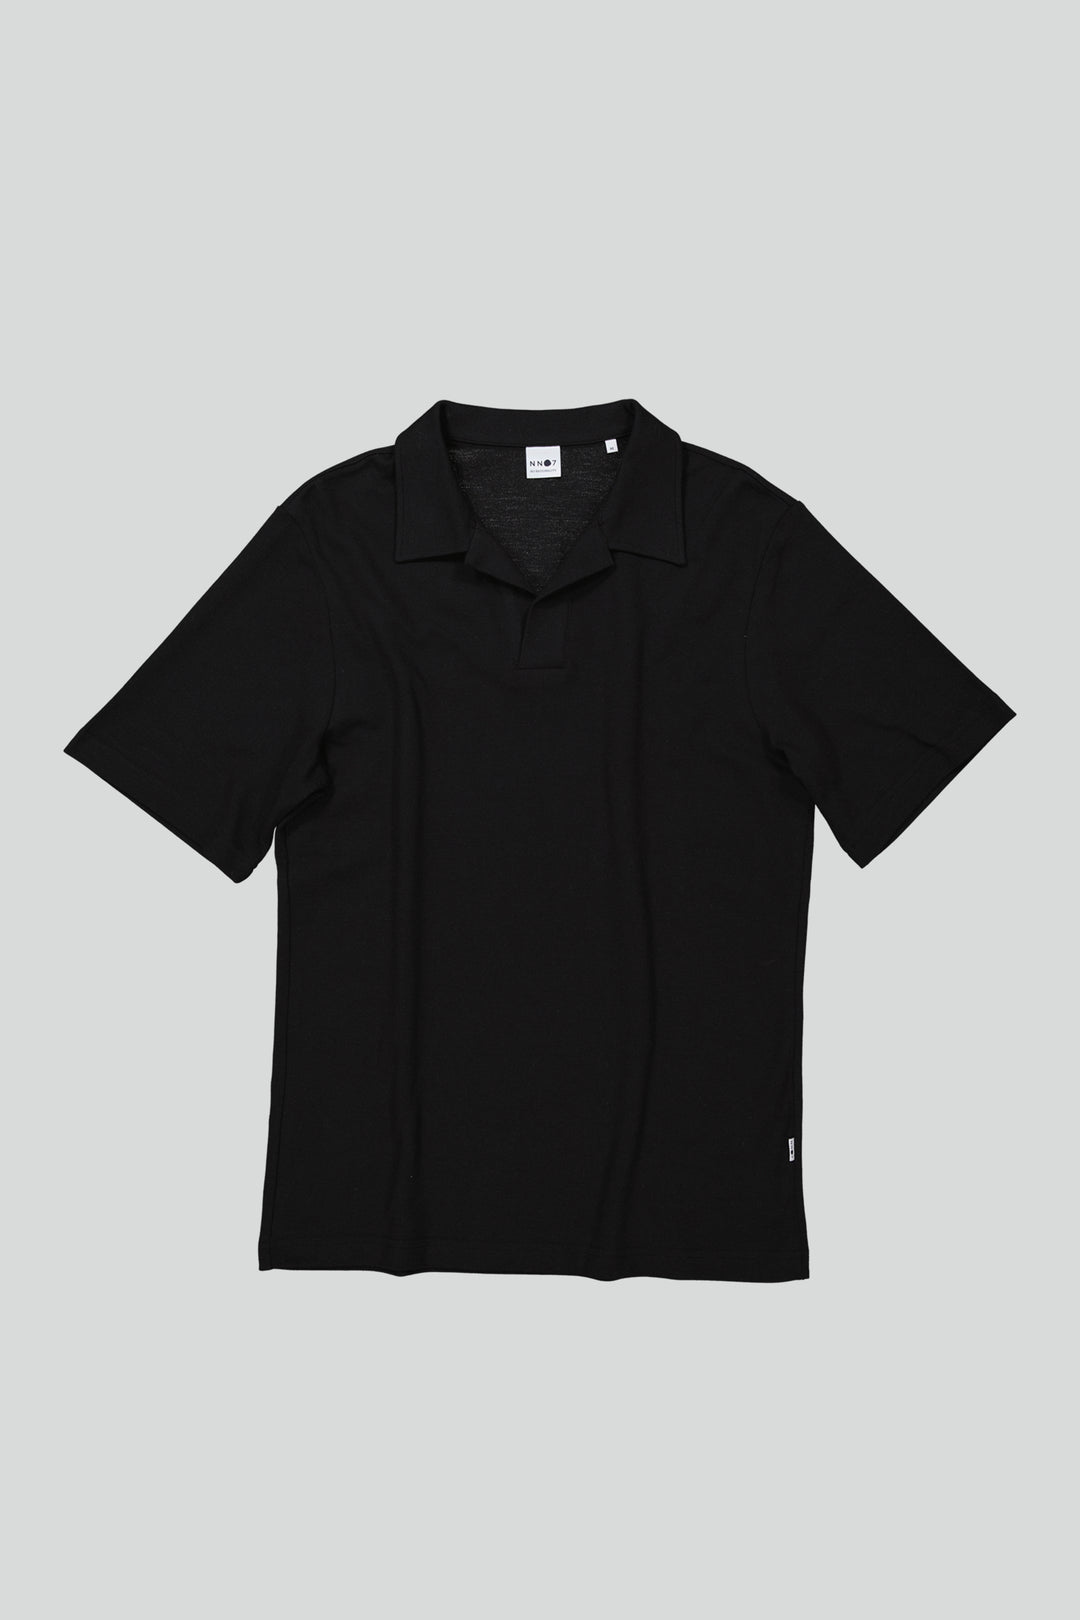 NN07 - Ross SS Polo 3463 Polo in Black | Buster McGee